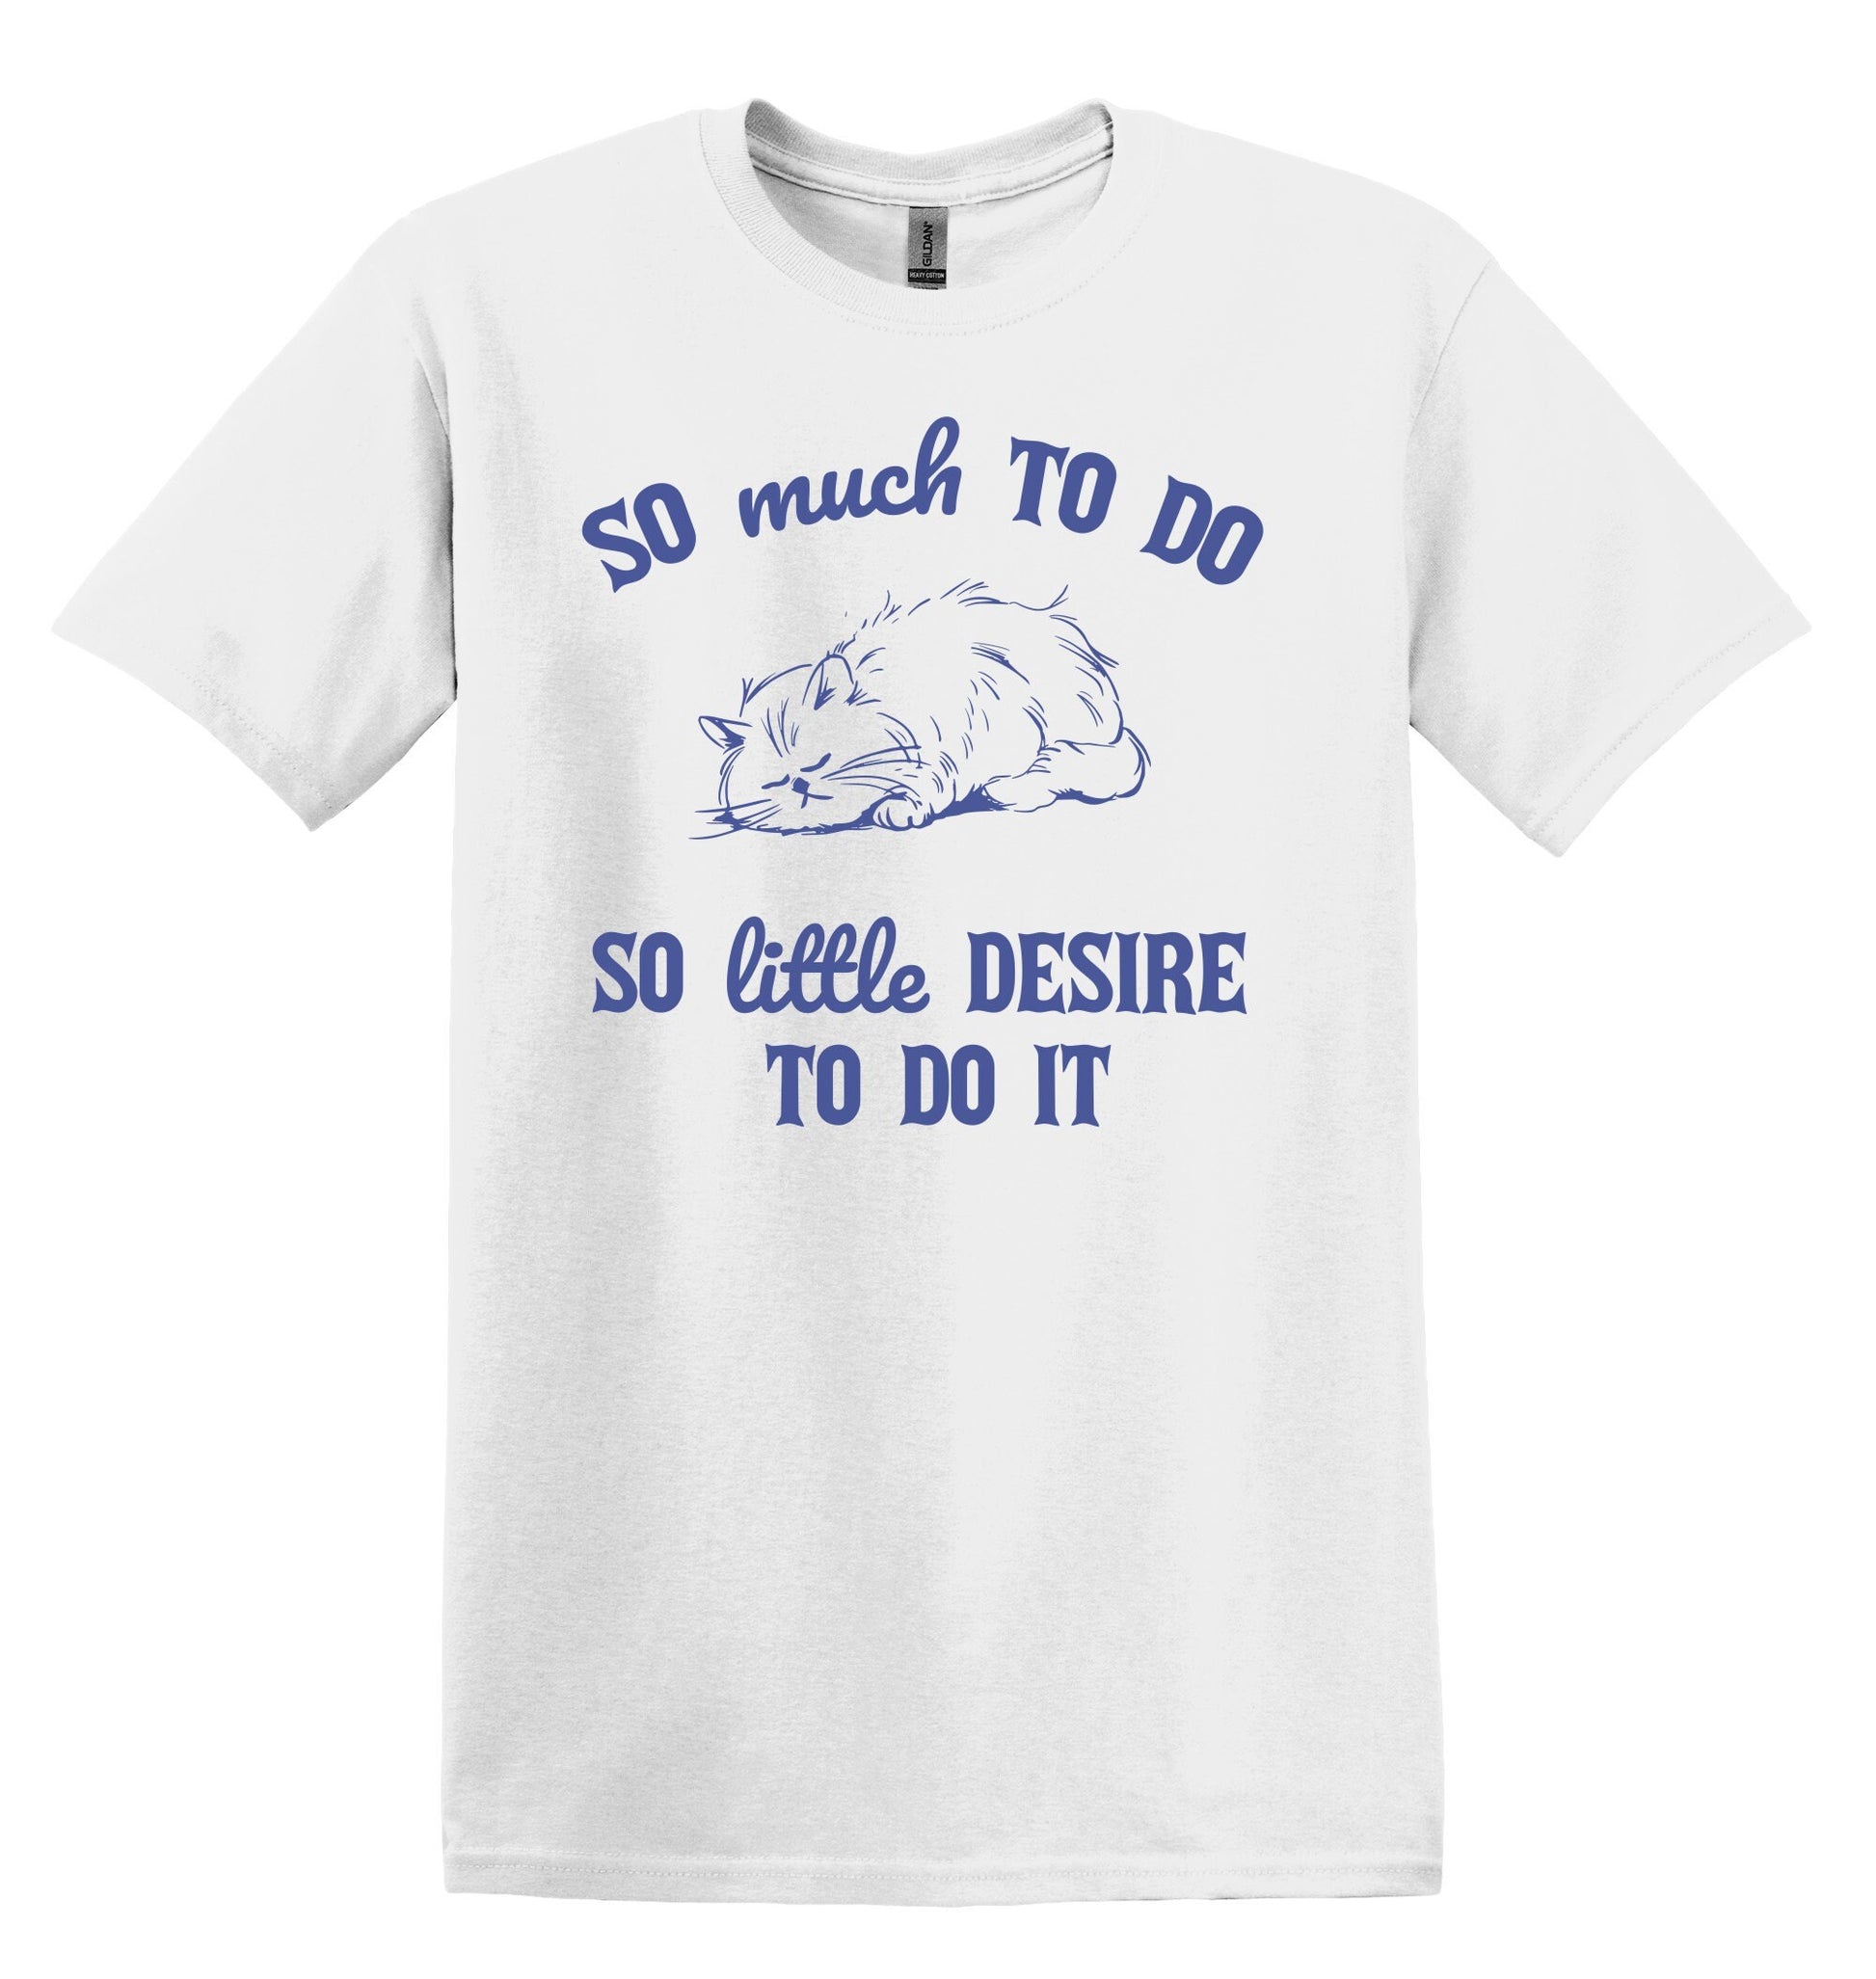 So Much to Do So Little Desire to Do It Shirt Graphic Shirt Funny Adult TShirt Vintage Funny TShirt Nostalgia T-Shirt Relaxed Cotton Shirt